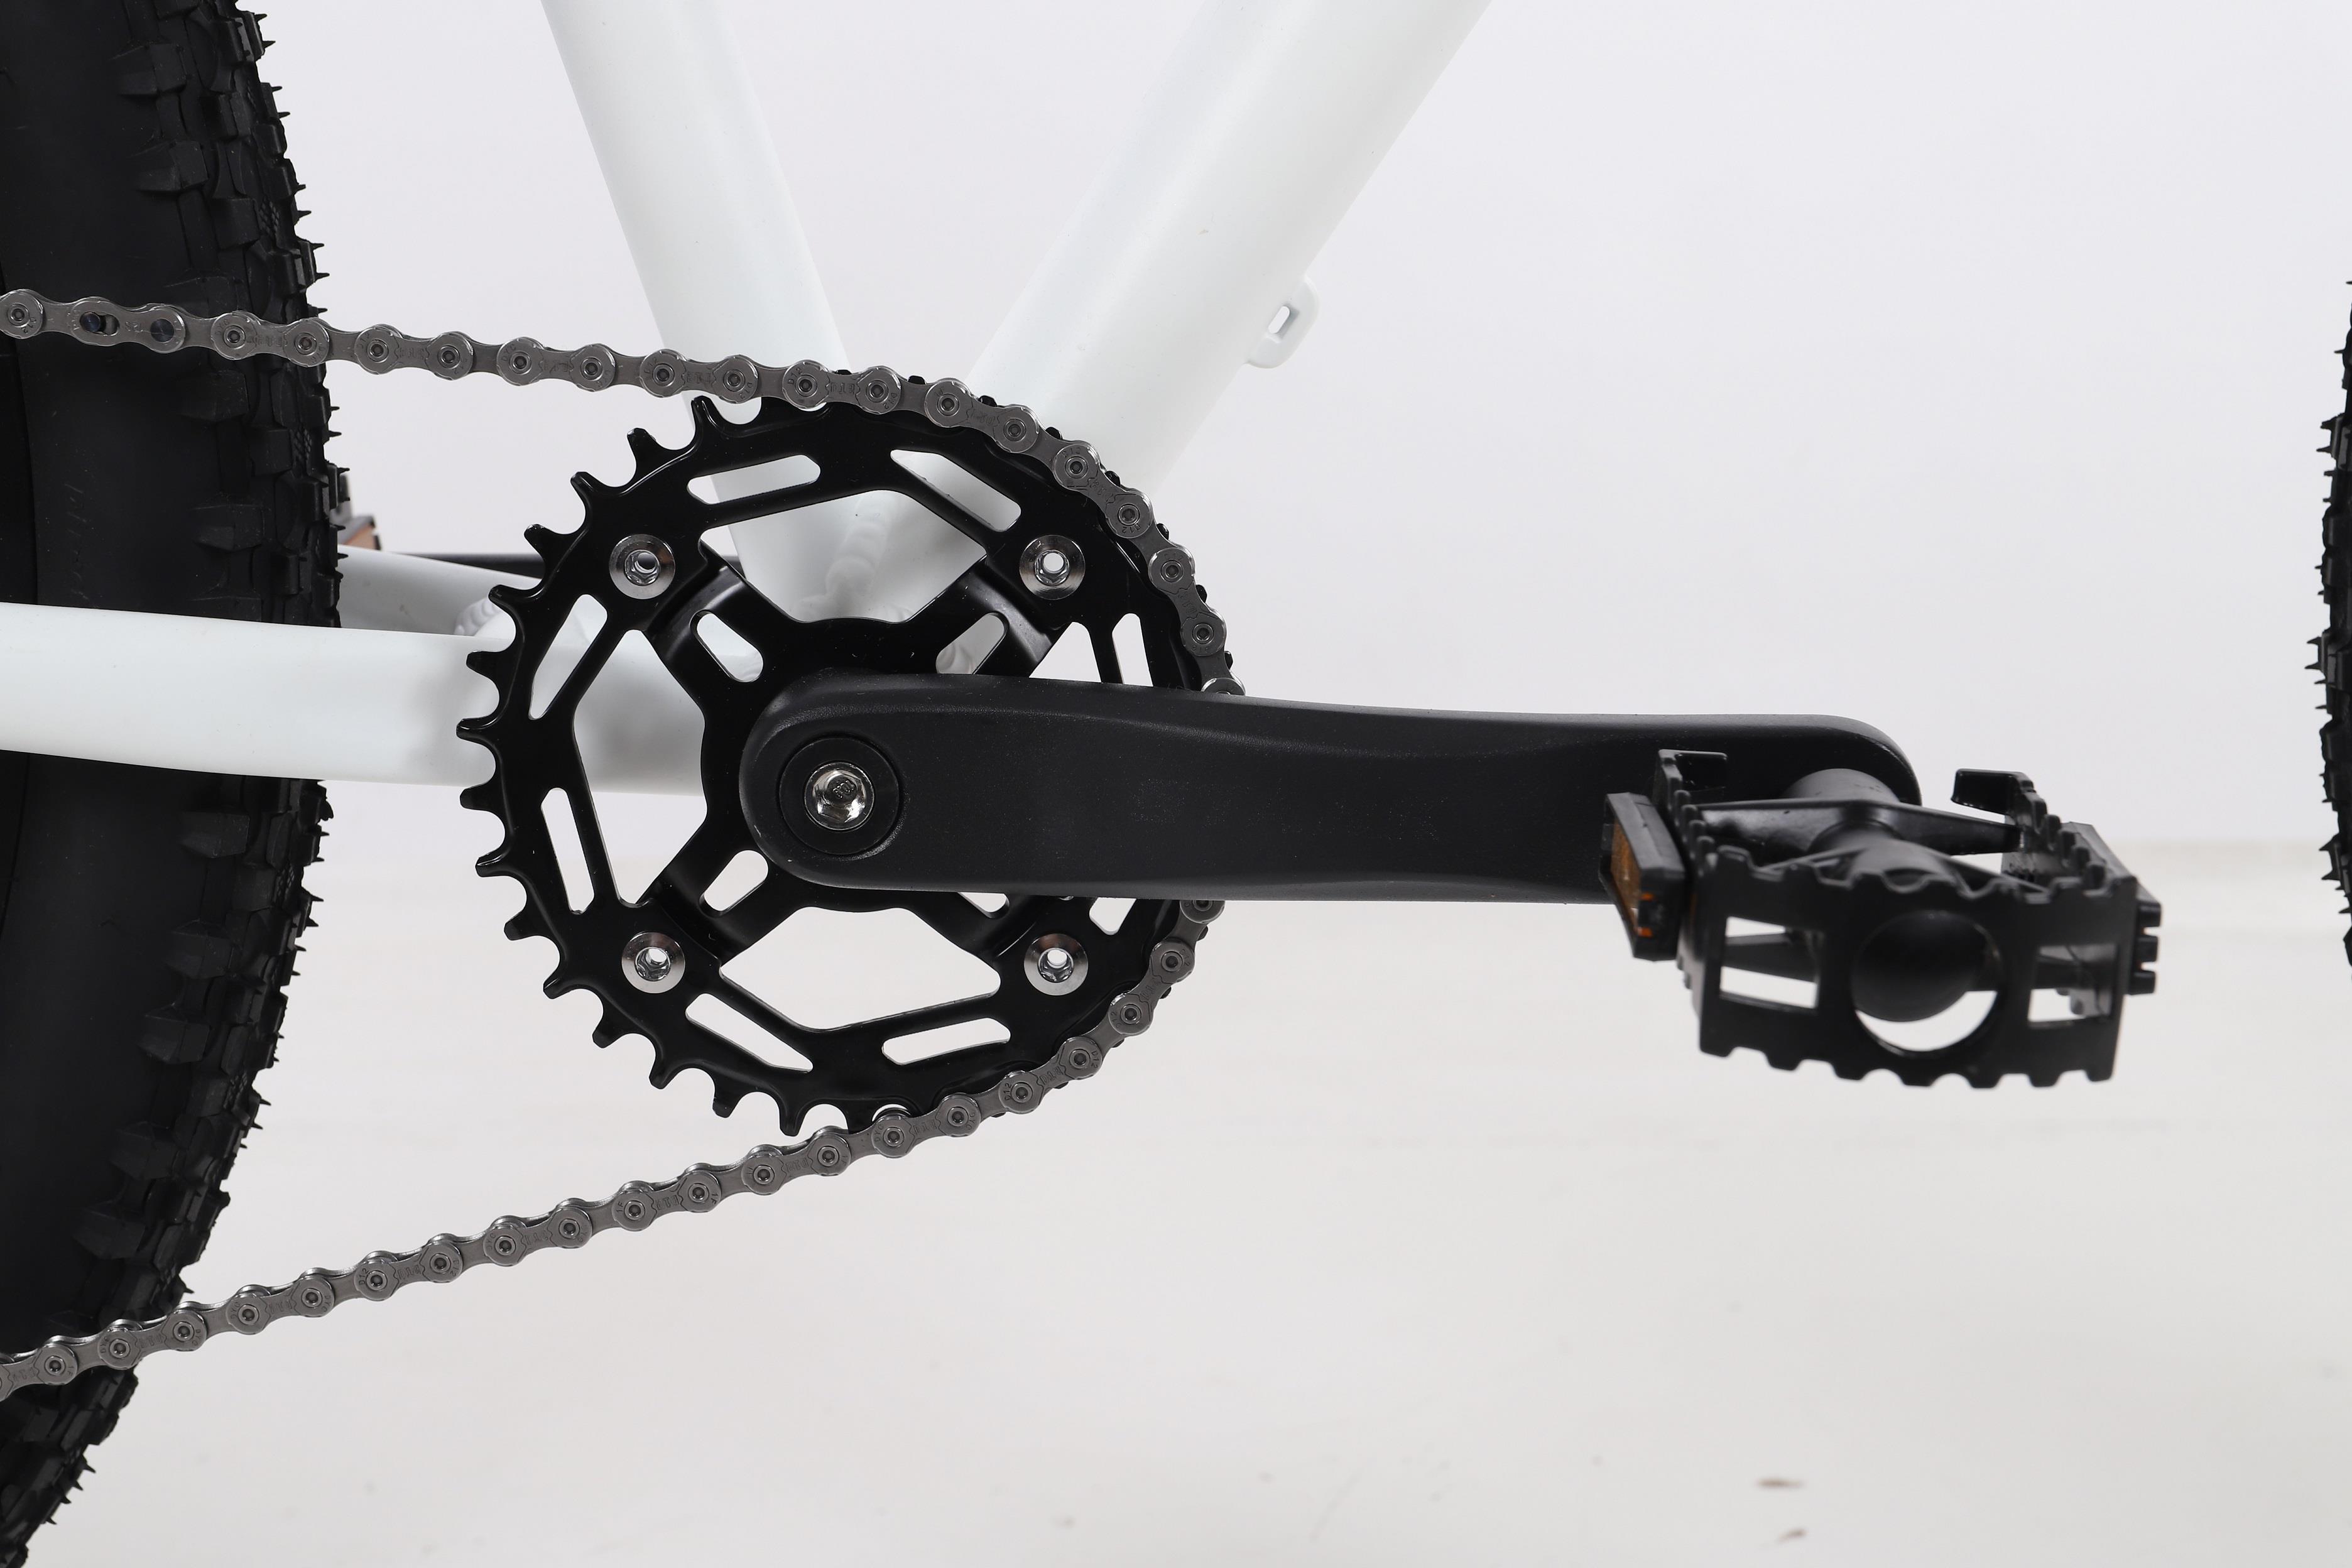 China OEM Aluminum alloy frame and fork mountain bike 26 inch mountain bicycle Kylin tyre mountain cycling